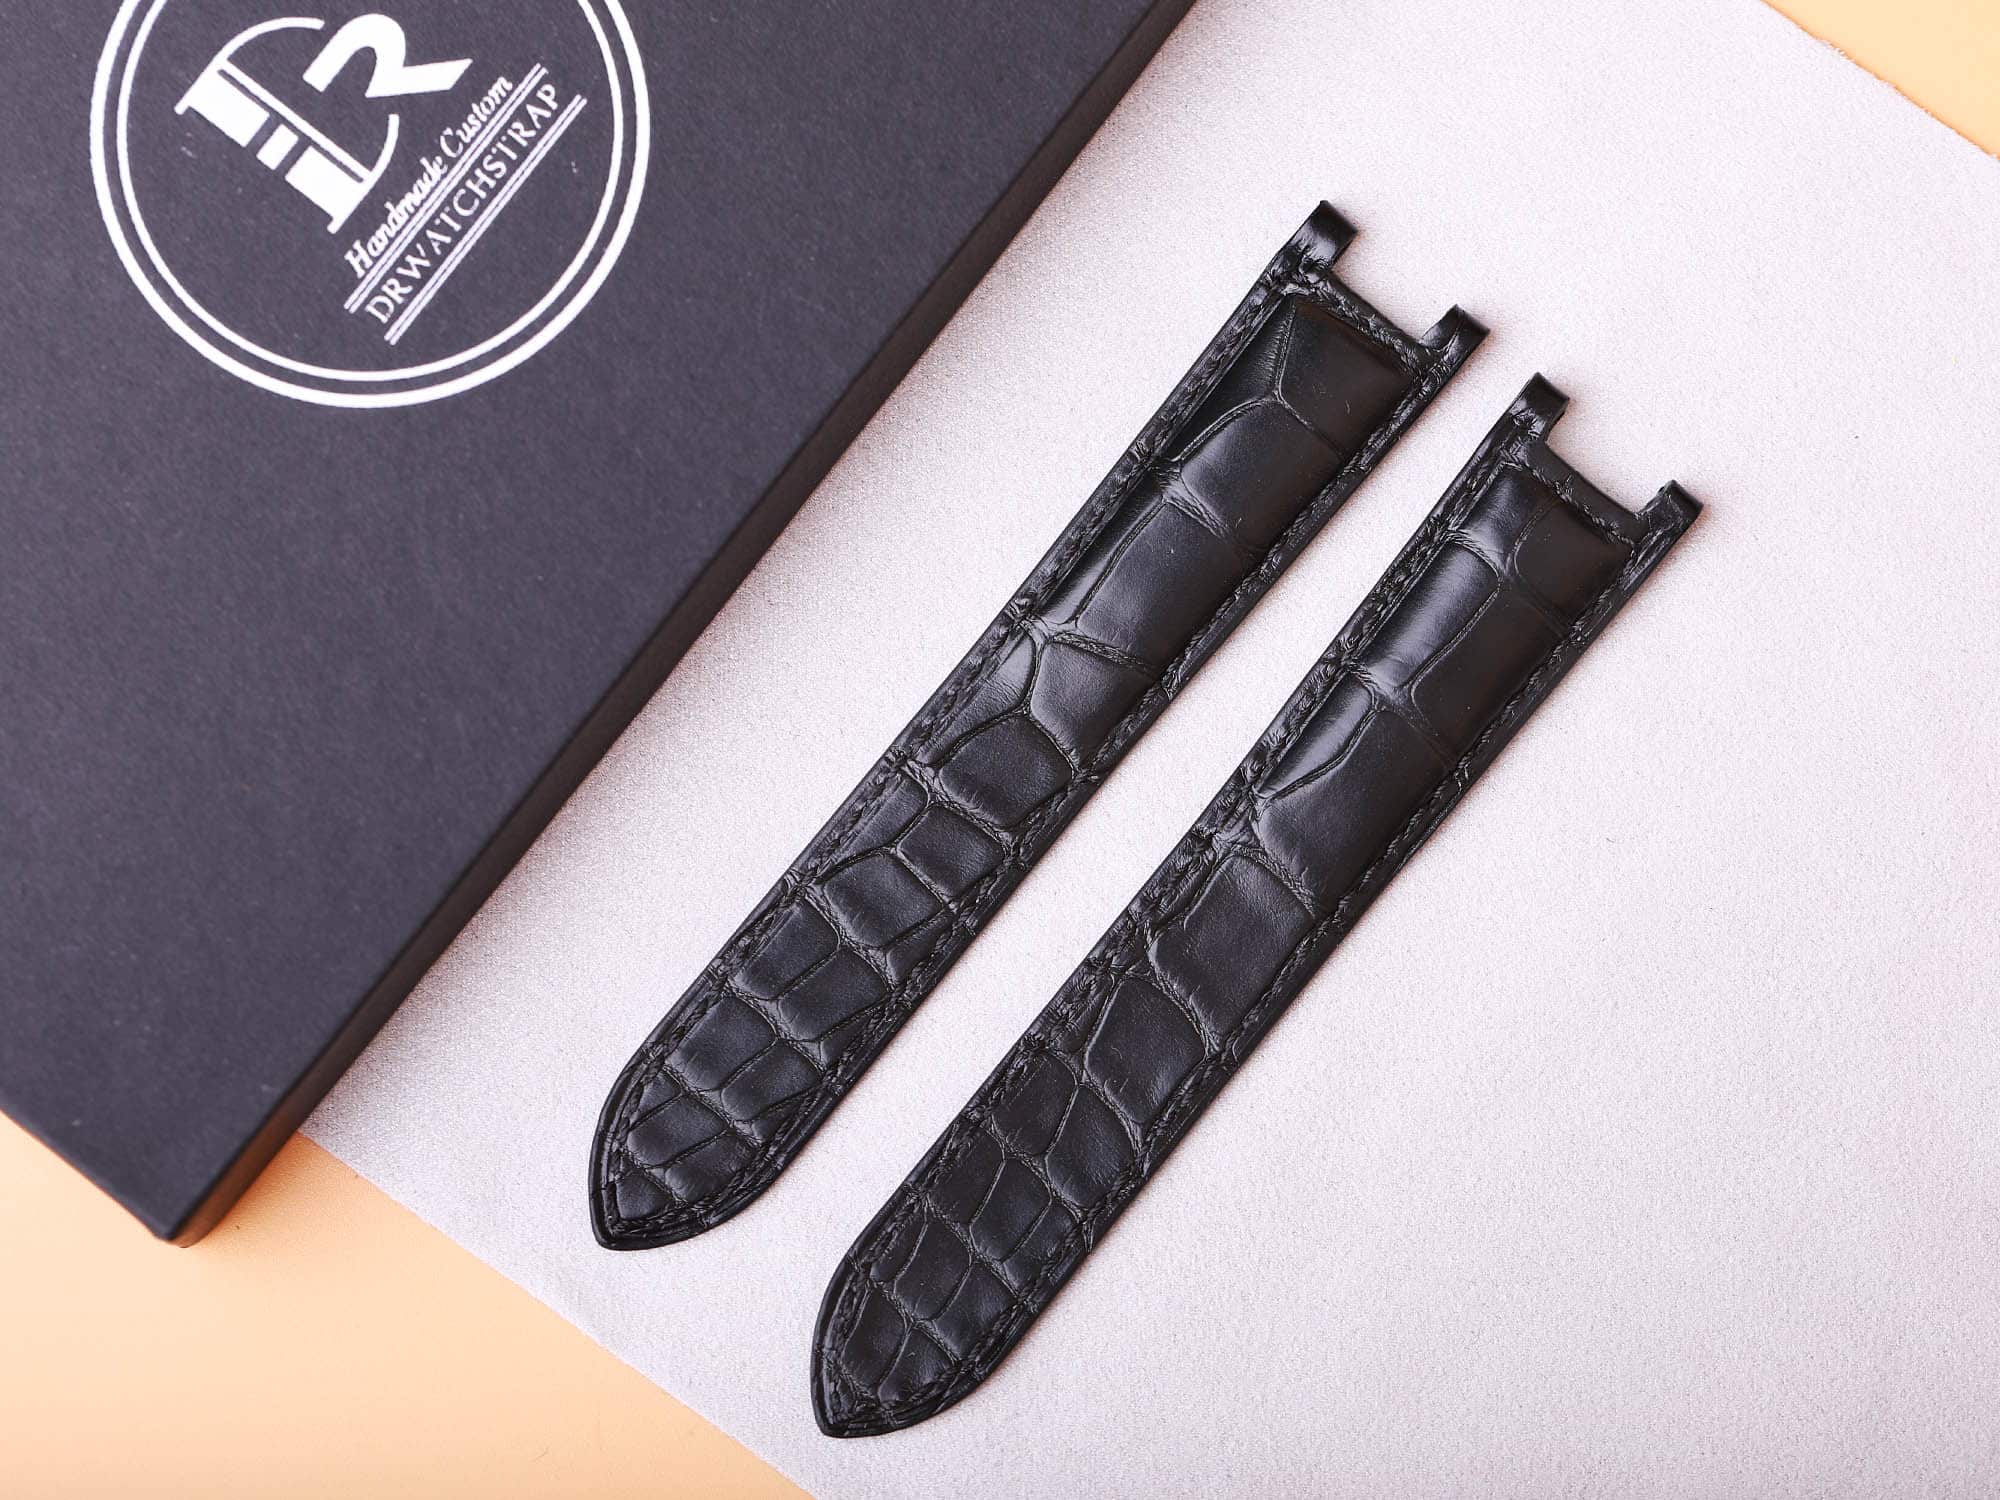 100% handmade black genuine OEM custom double-folded alligator crocodile leather strap and watch band replacement for Cartier Pasha De watches online - Shop the high-end quality Belly-scale bespoke leathr straps and watchbands online from DR Watchstrap onine at a low price